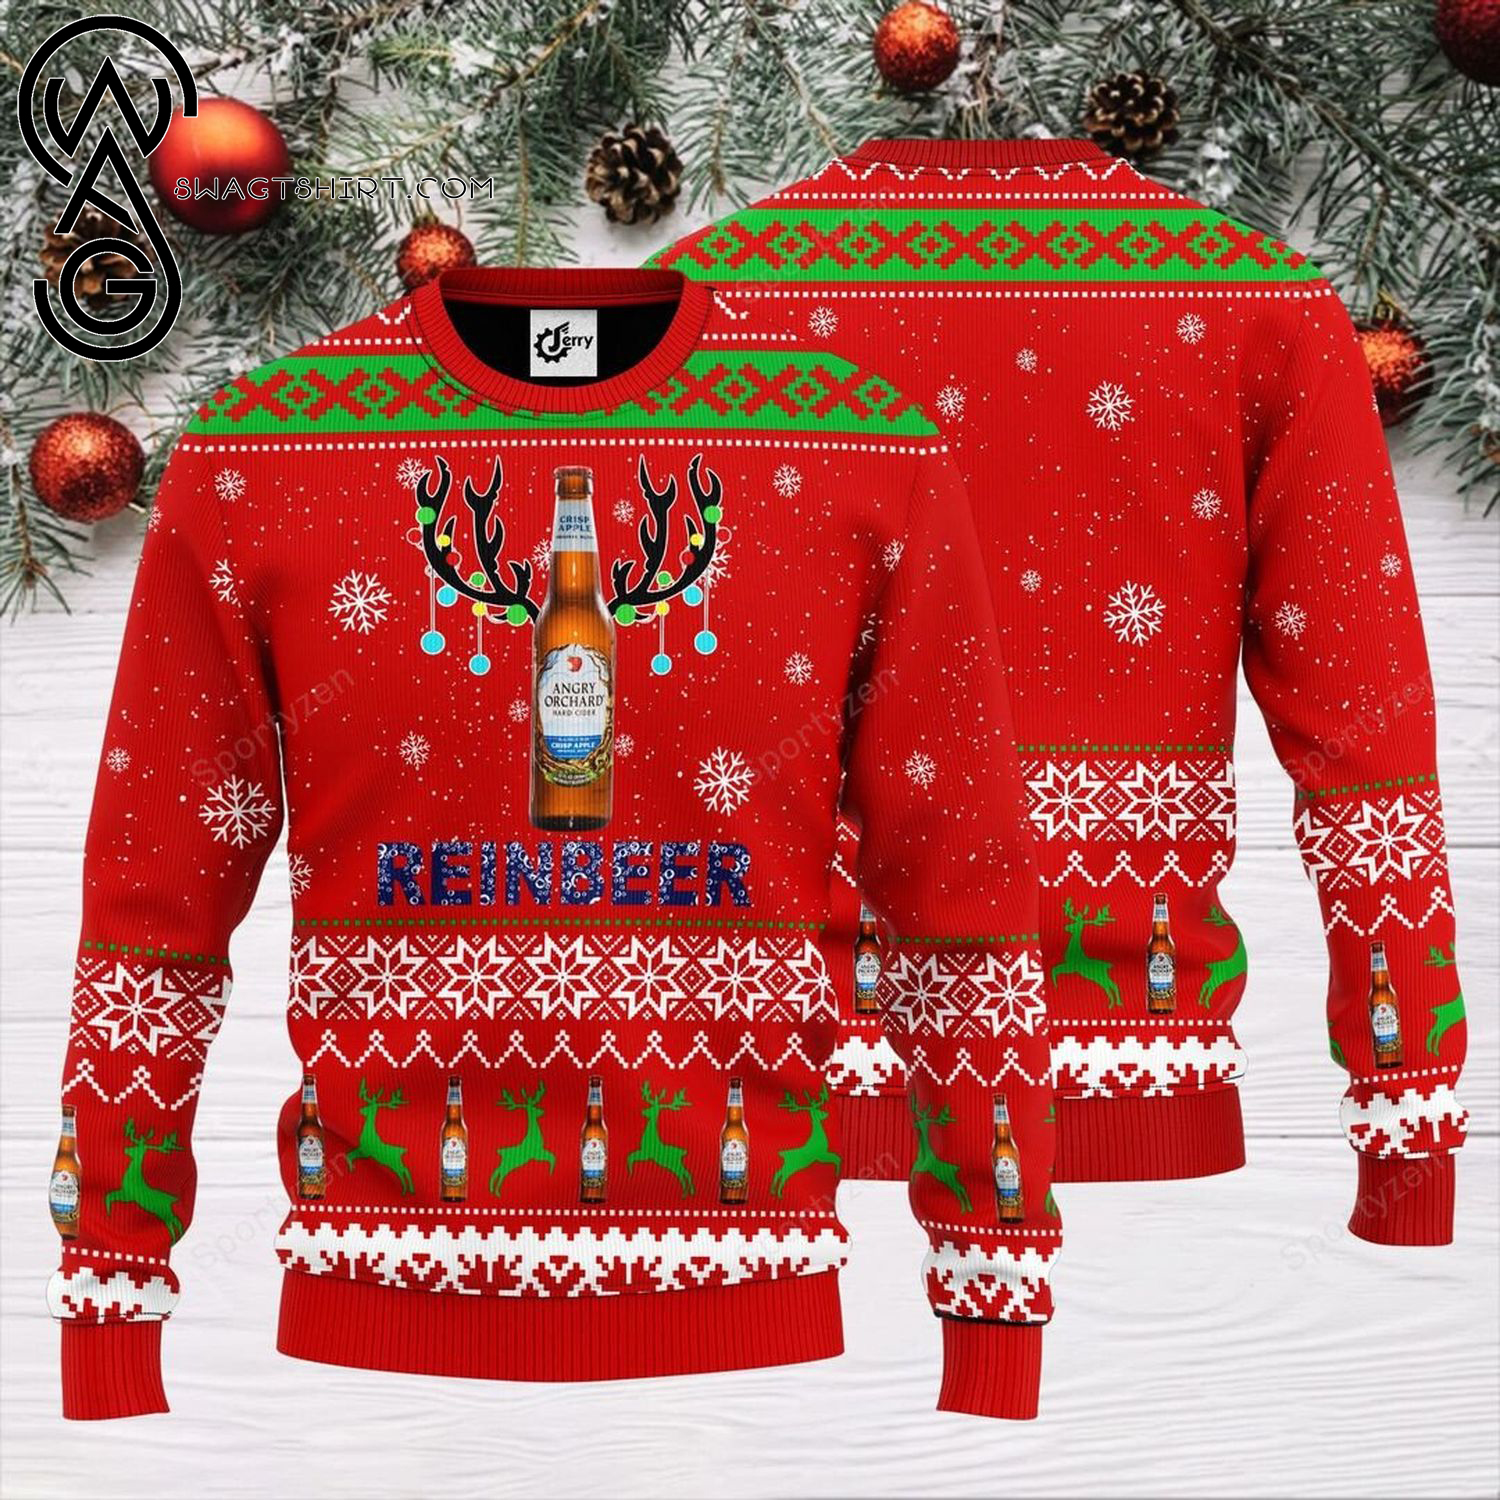 Angry Orchard Reinbeer Beer Full Print Ugly Christmas Sweater